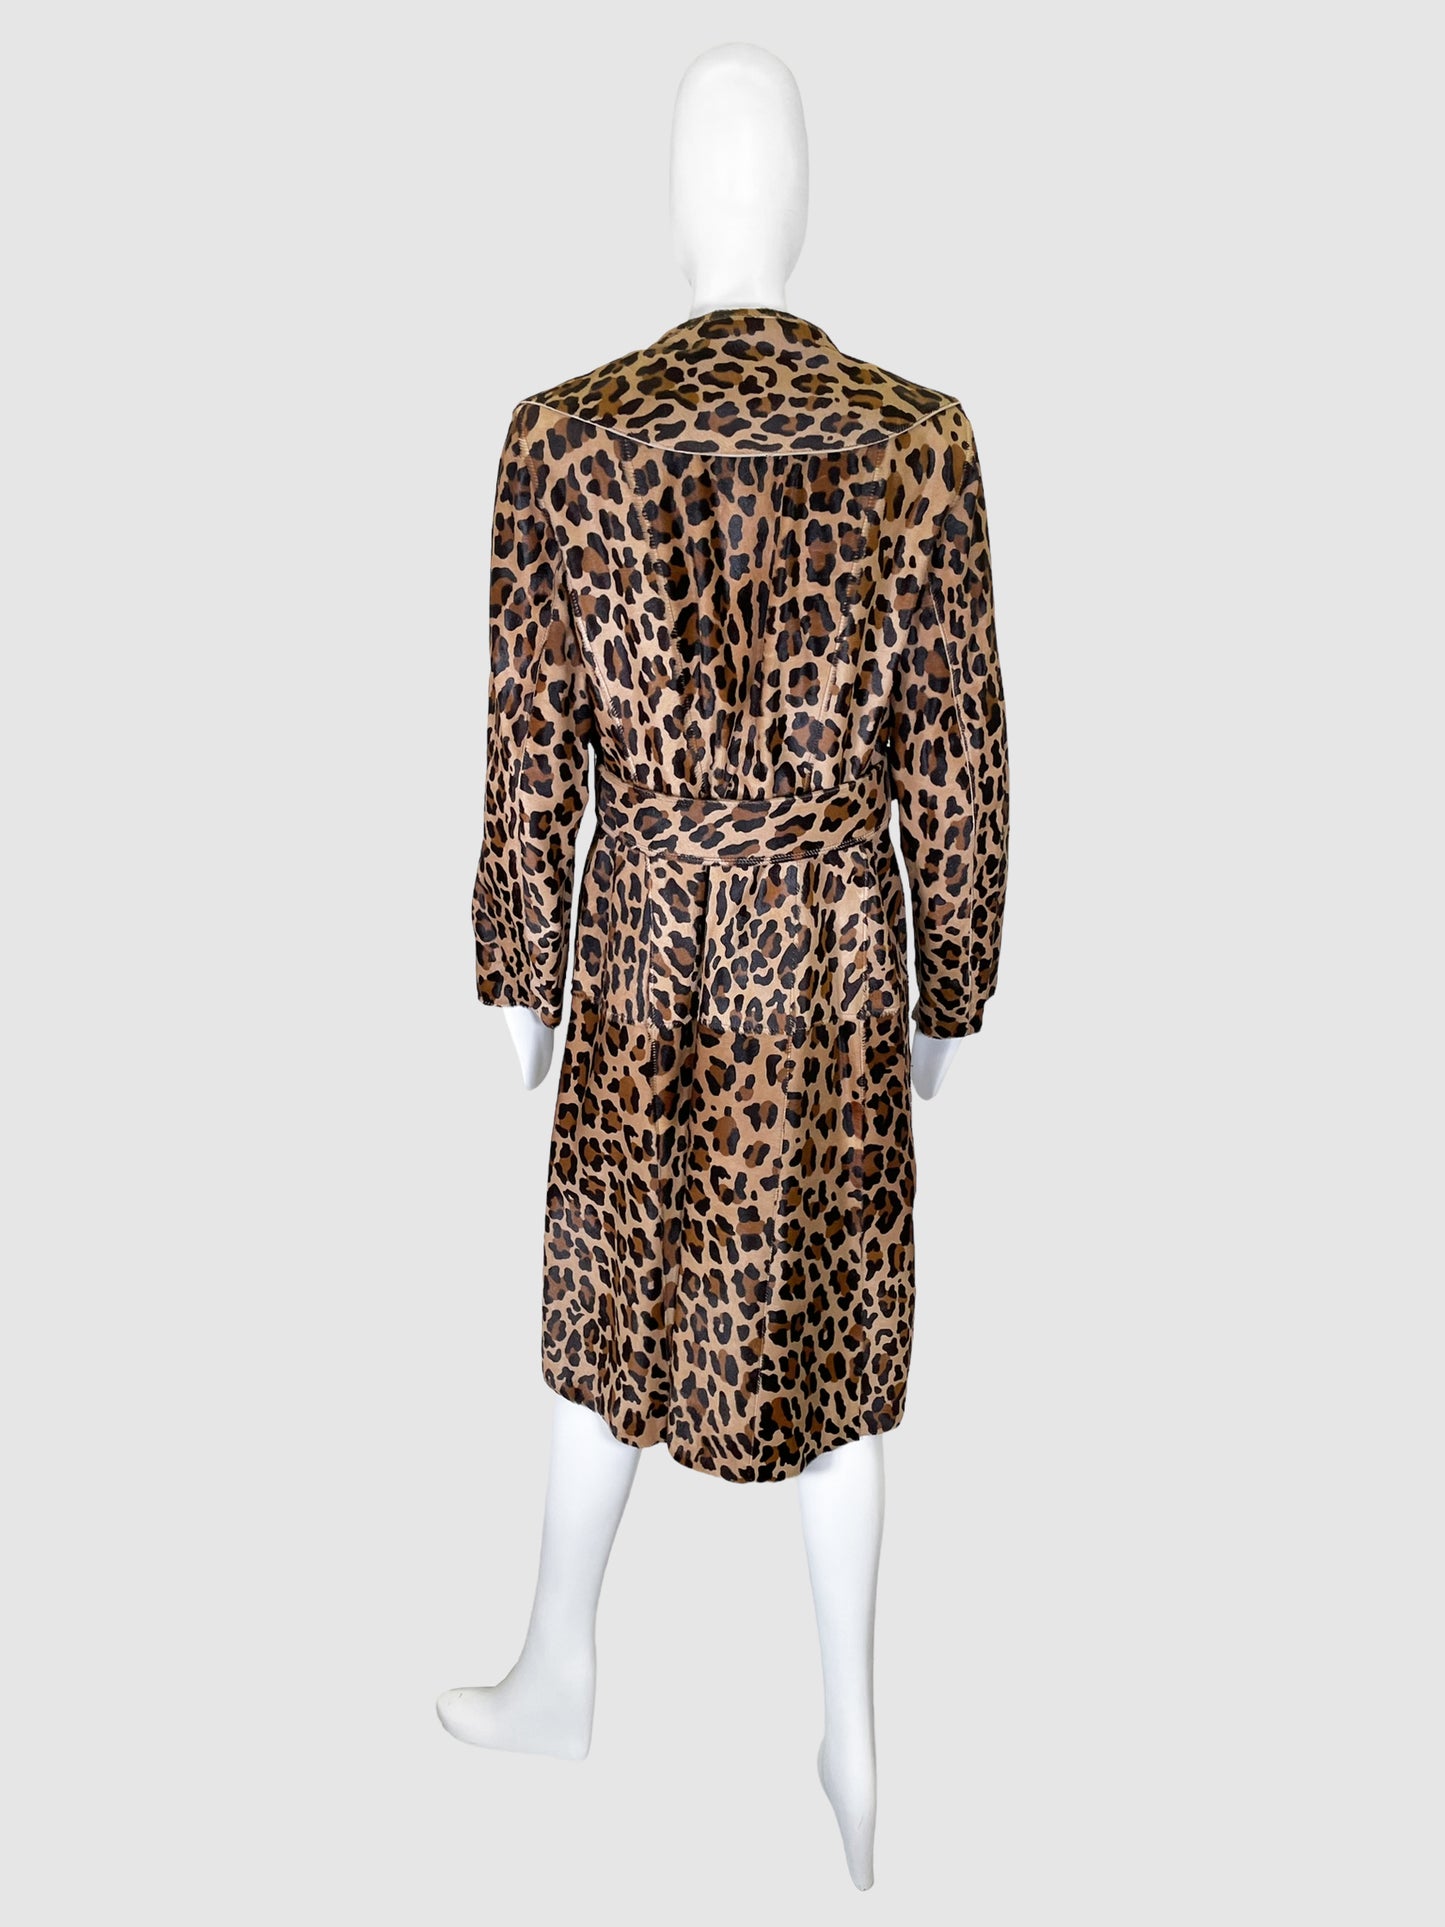 Leopard Print Single-Breasted Coat - Size M